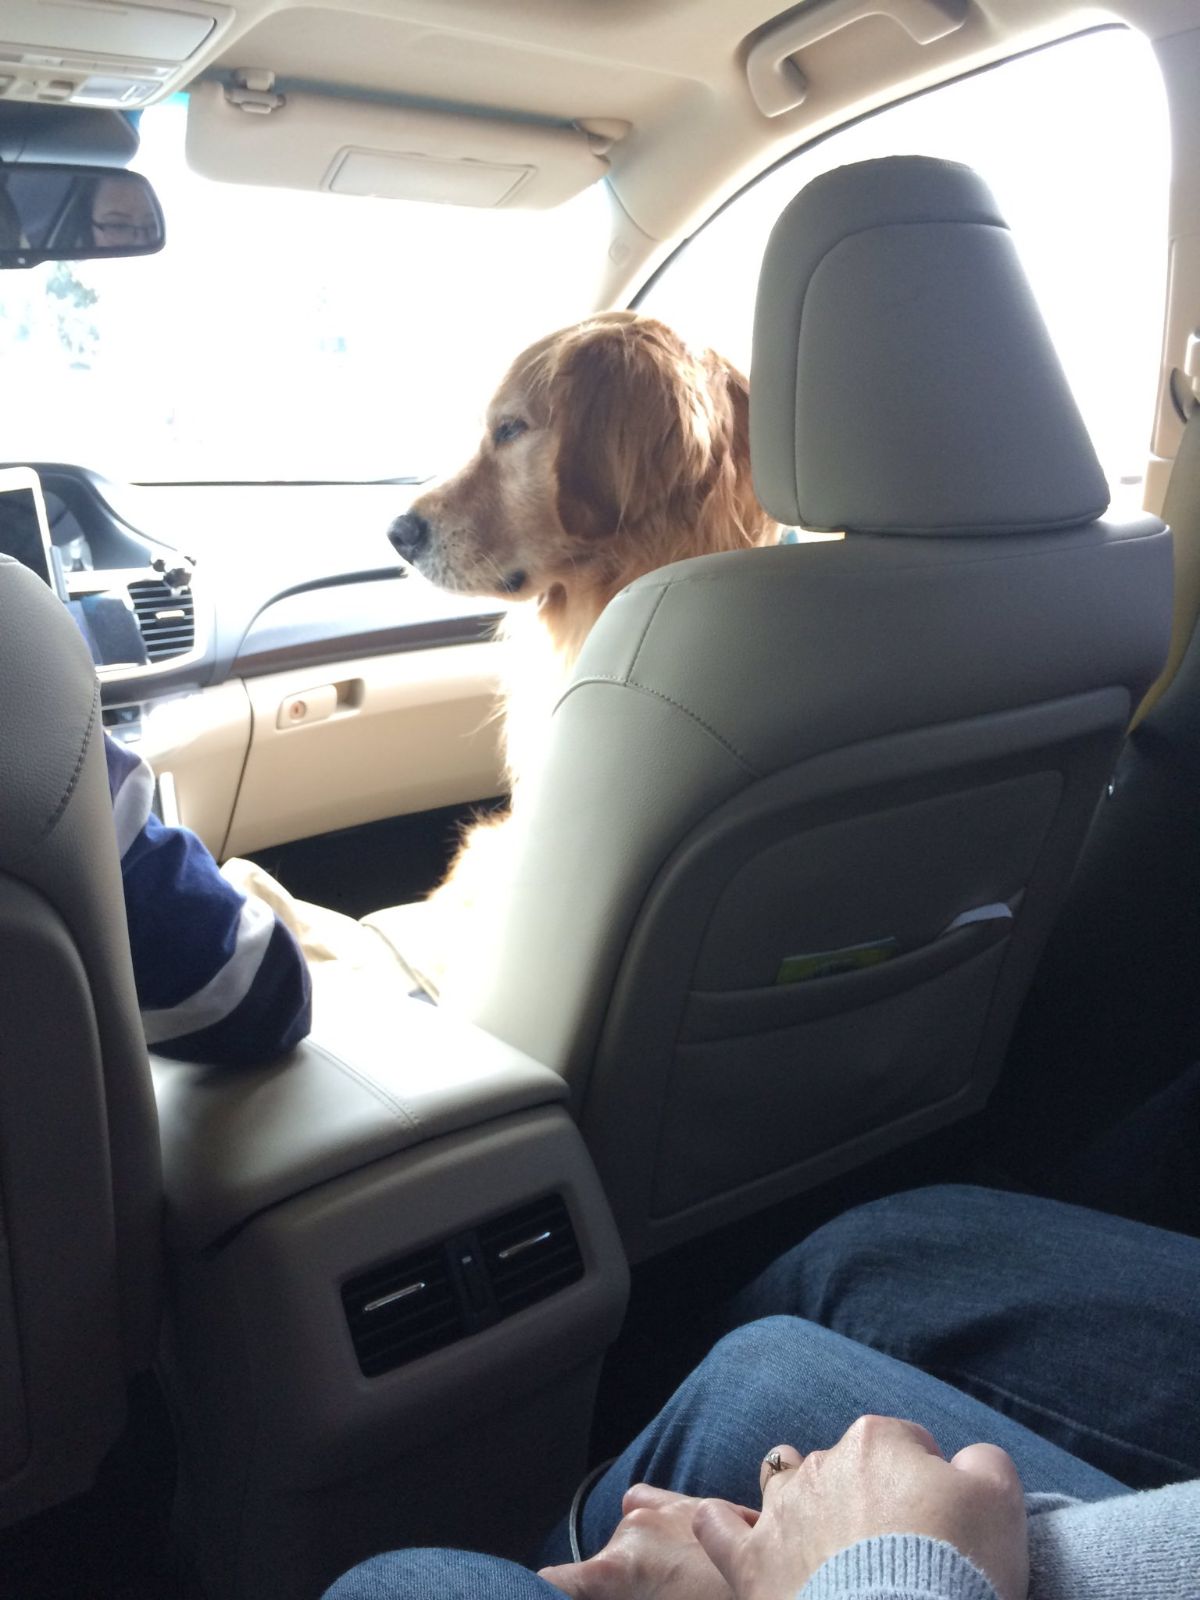 golden retriever sitting in the passenger seat next to a man with 2 people in the backseat